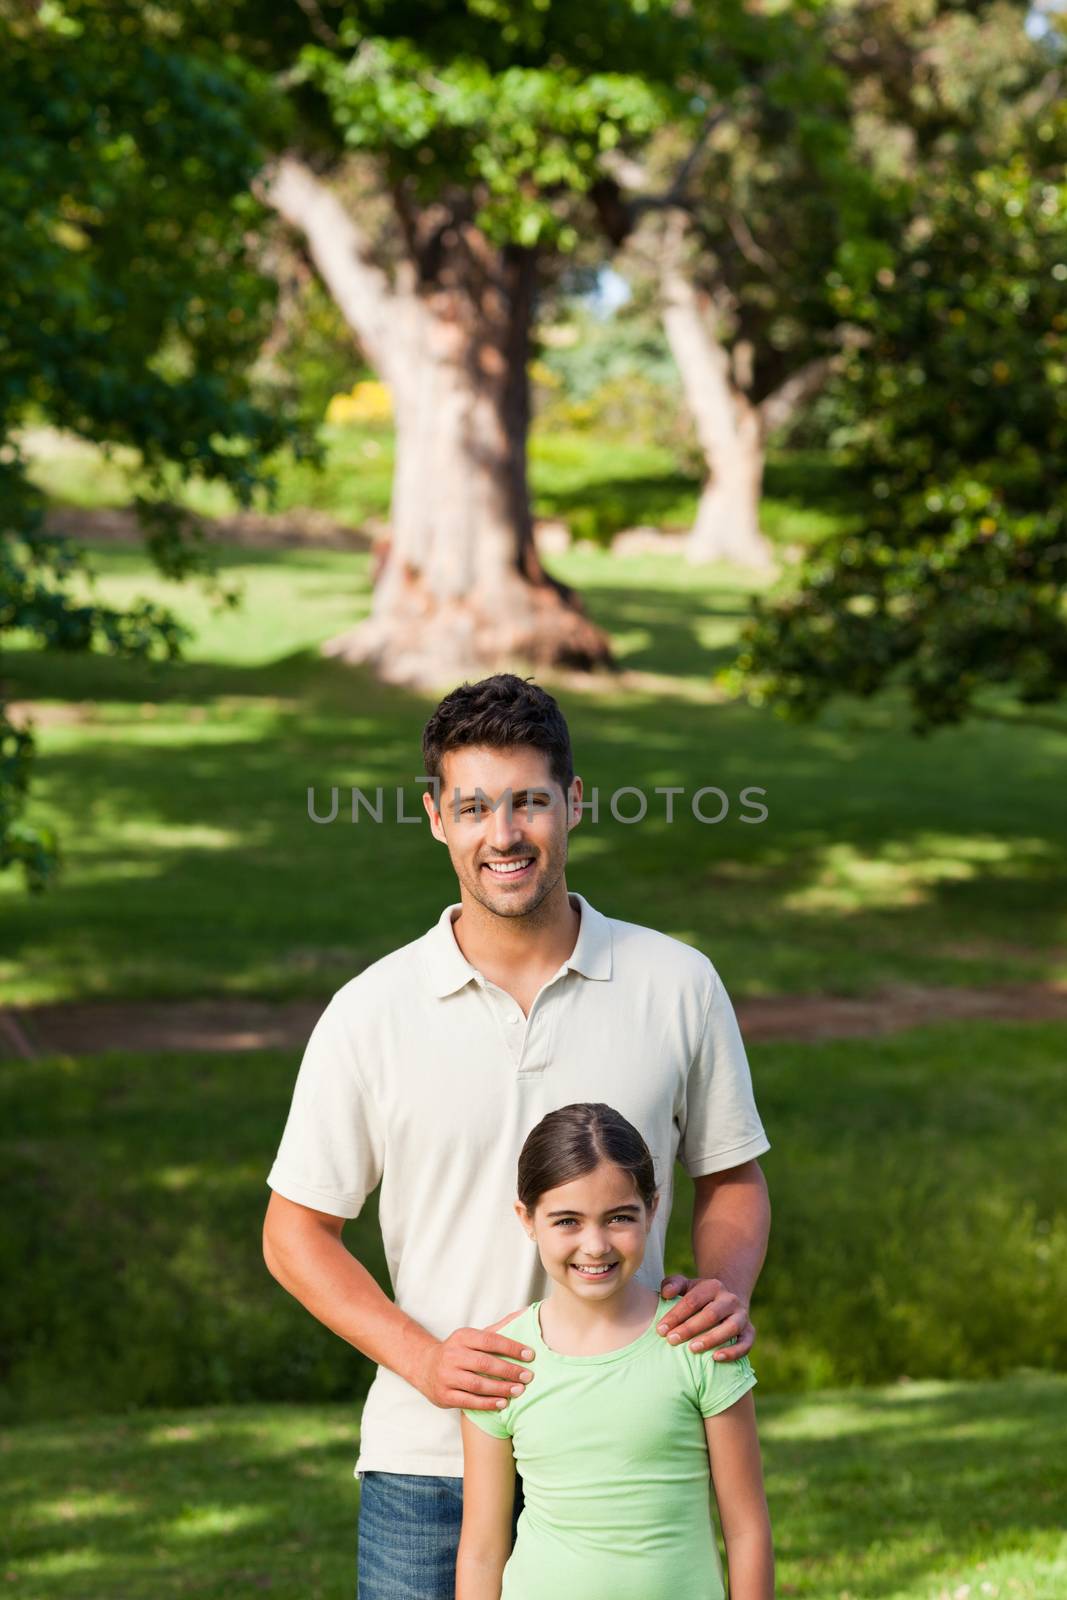 Daughter with her father in the park by Wavebreakmedia